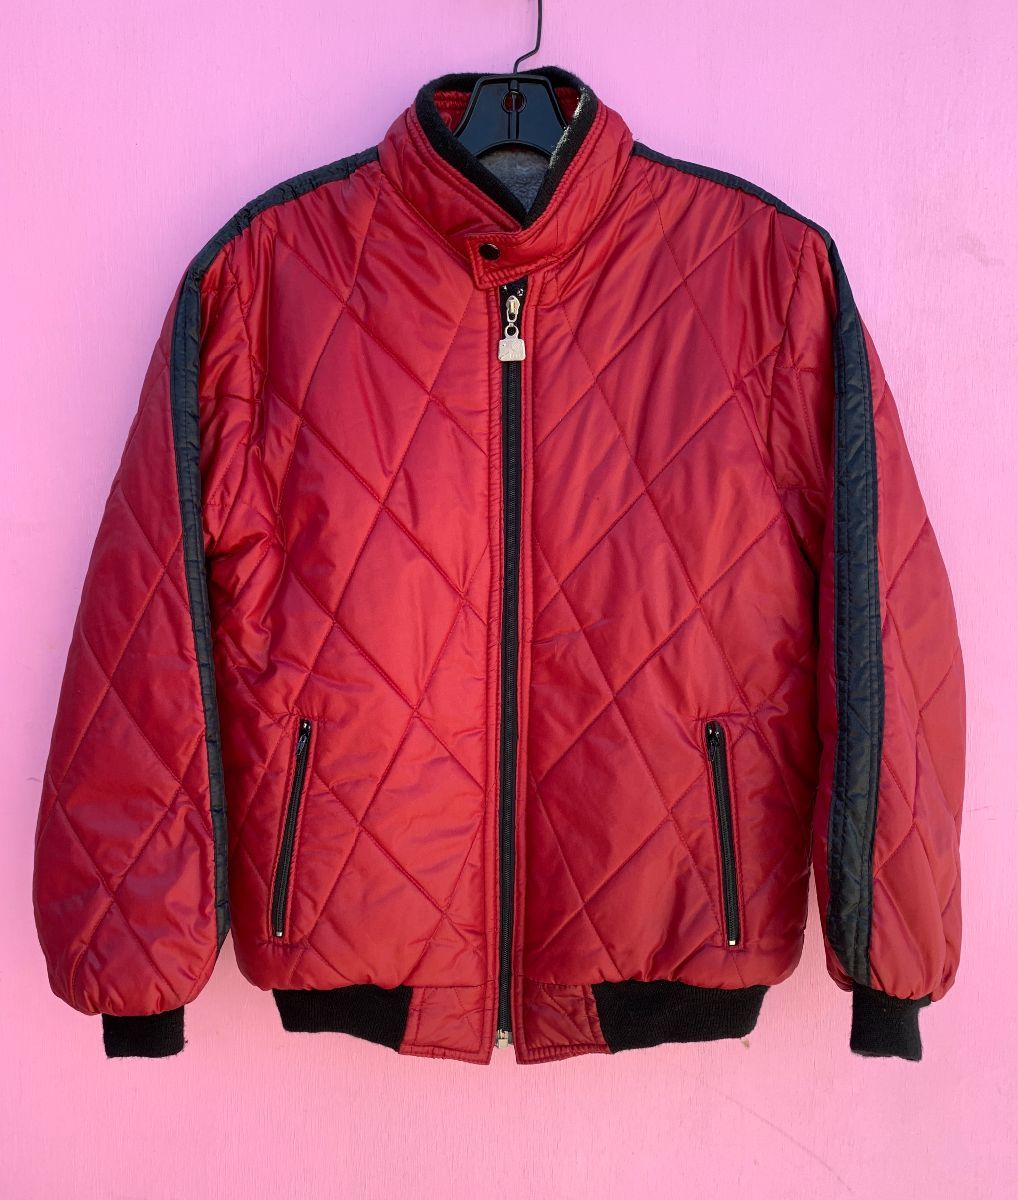 product details: RETRO QUILTED NYLON ZIPUP JACKET SHERPA LINING SIDE STRIPES photo